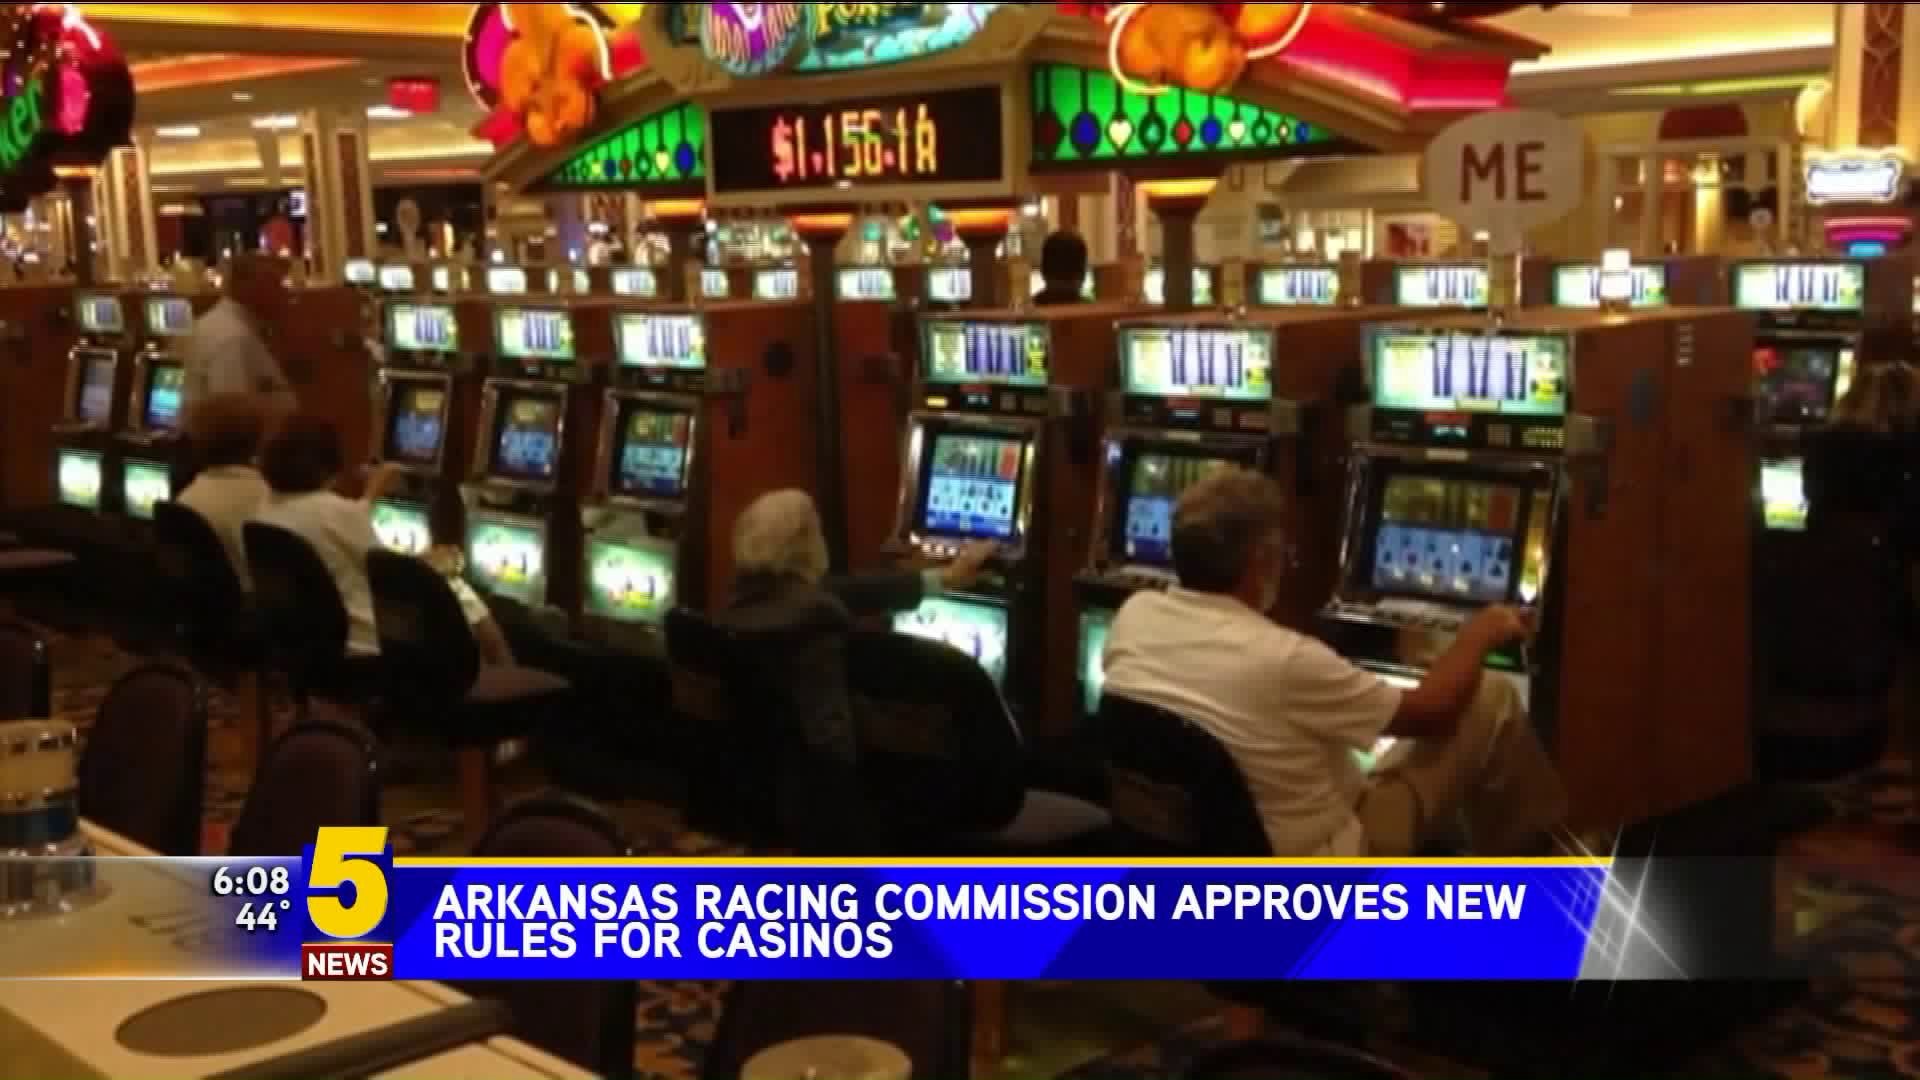 Arkansas Racing Commission Approves New Rules For Casinos